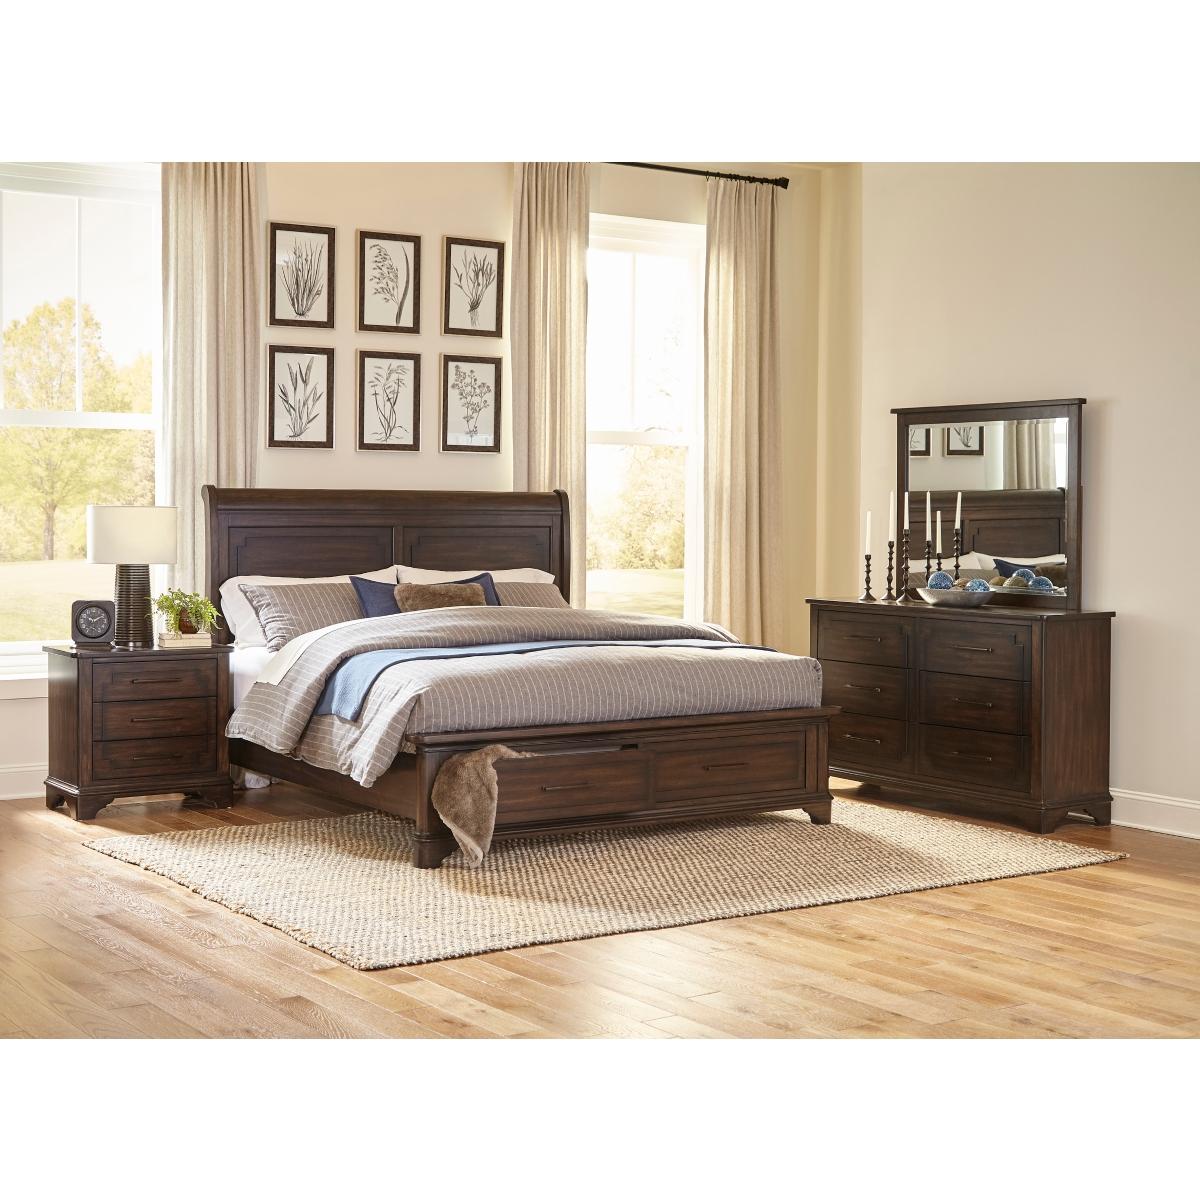 Traditional Bedroom Set 1406-1*5PC 1406-1*5PC in Rustic Brown 